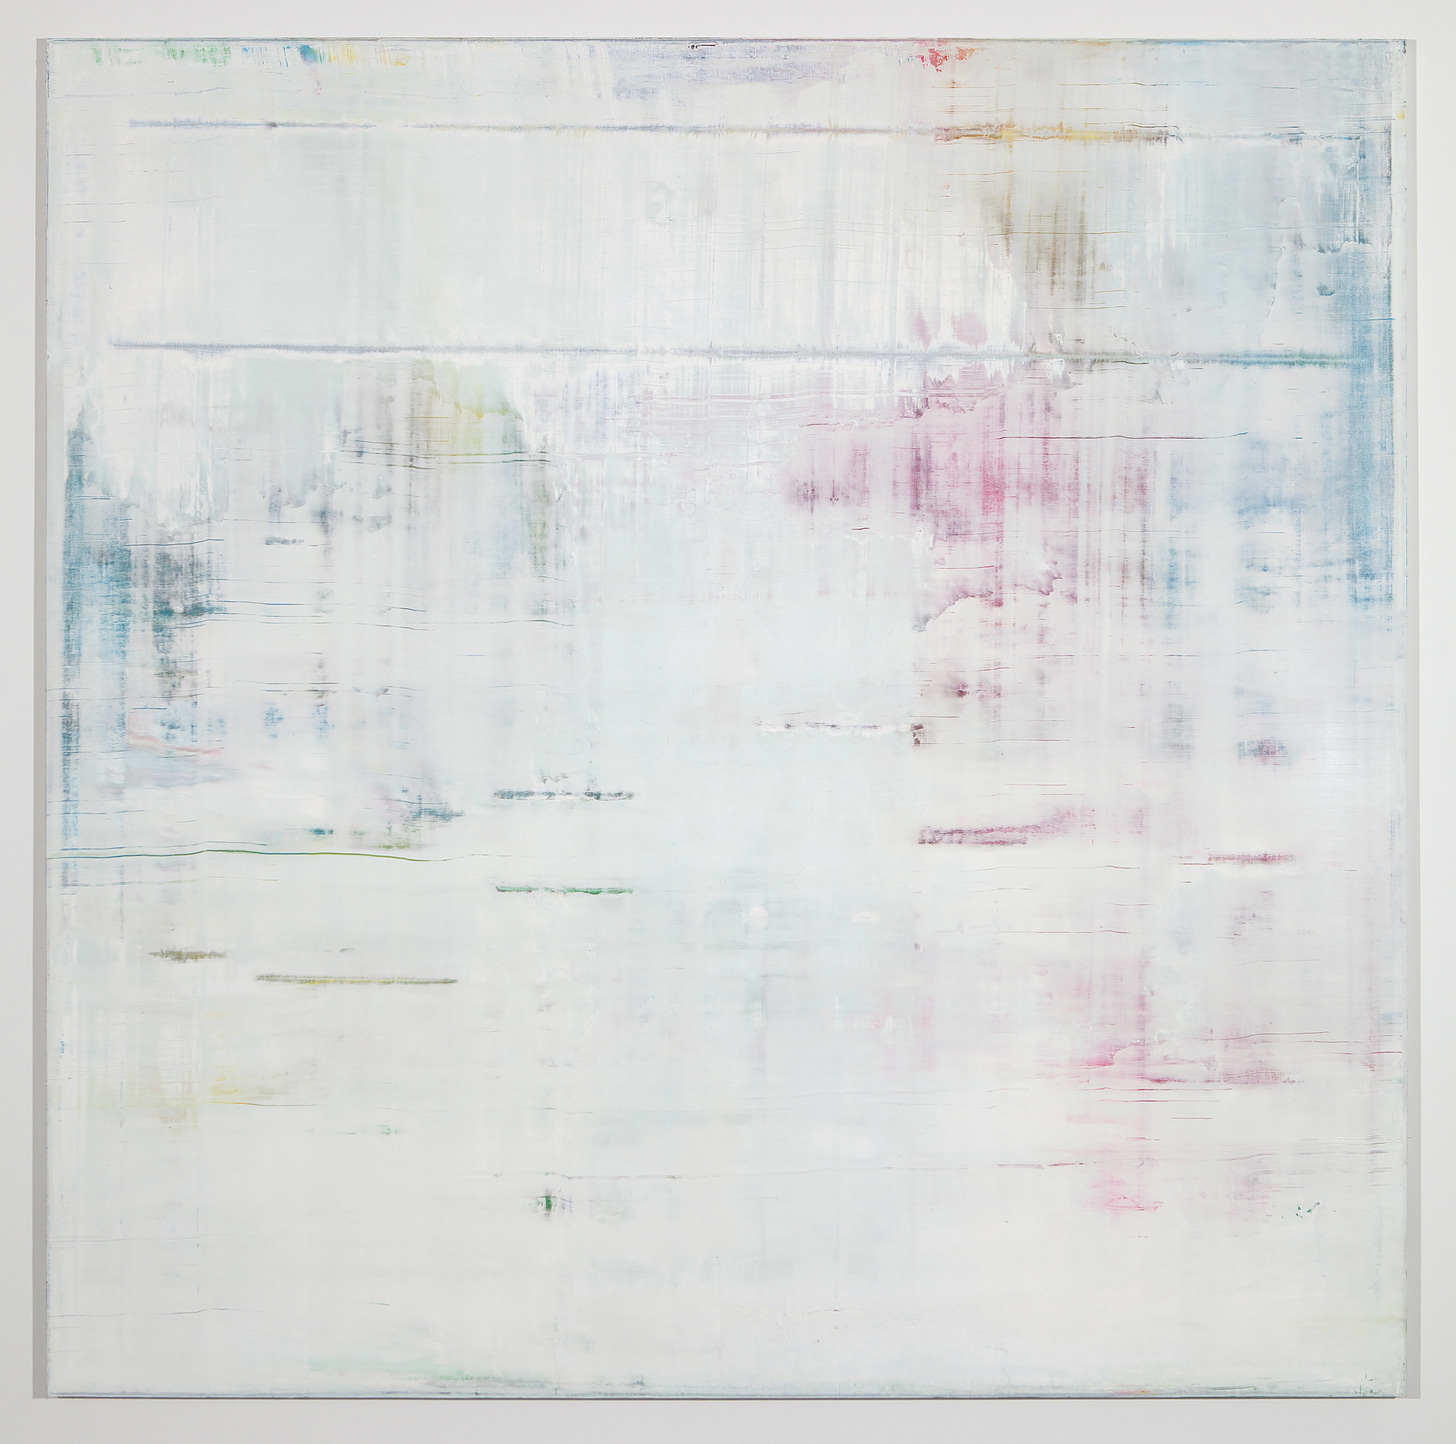 A painting by Gerhard Richter: It shows an almost entirely white square canvas, on which there are faint, perpendicular streaks of turquoise, pink and yellow paint running horizontally and vertically across. It appears as thought the colorful streaks were covered with additional layers of white paint. The painting possesses a quality of tranquility and spaciousness within in. 